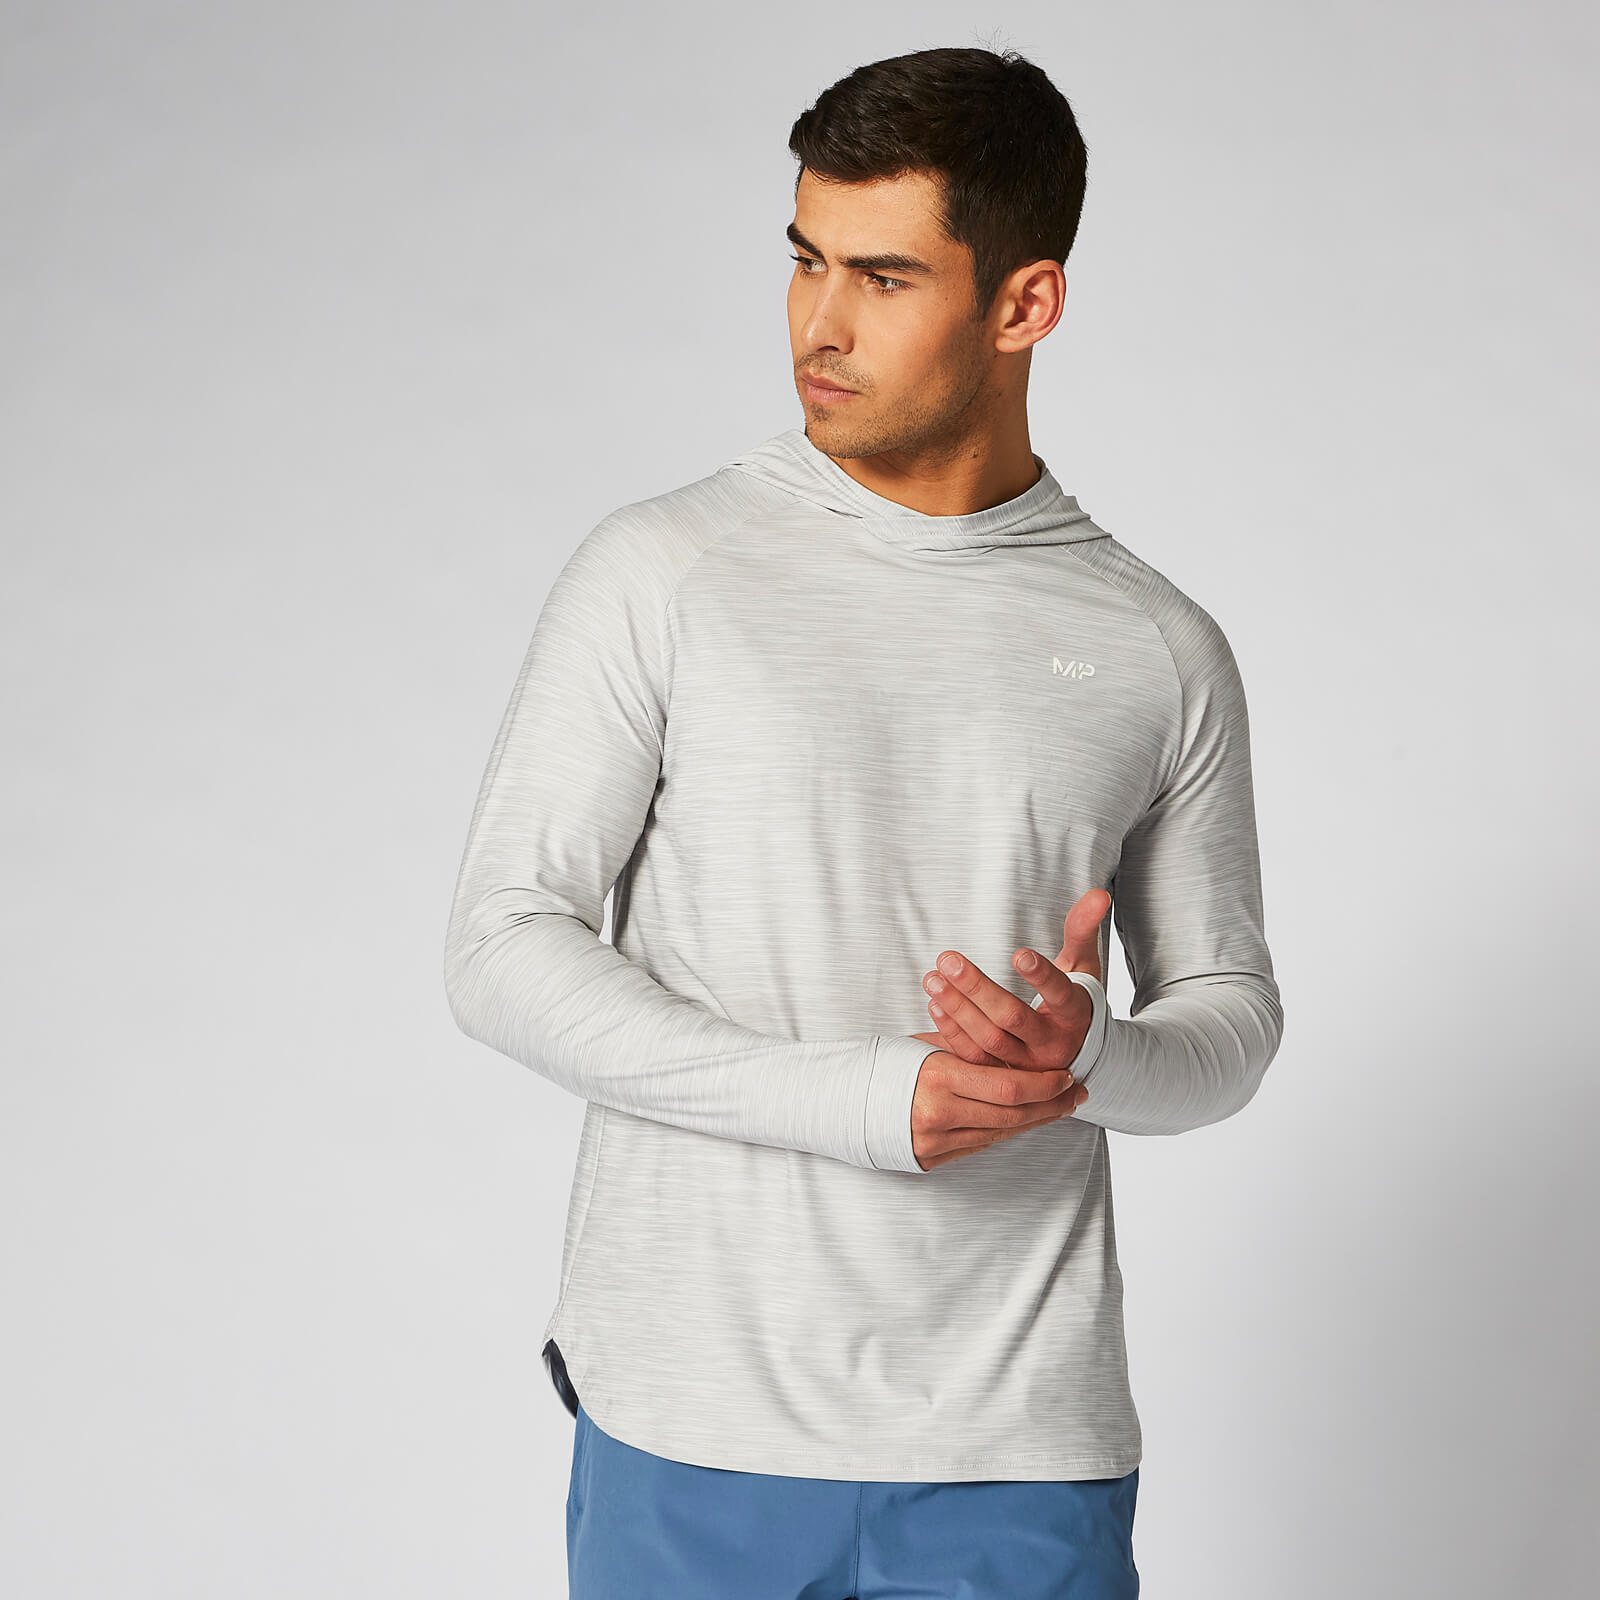 Myprotein Dry Tech Infinity Hoodie - Silver - S